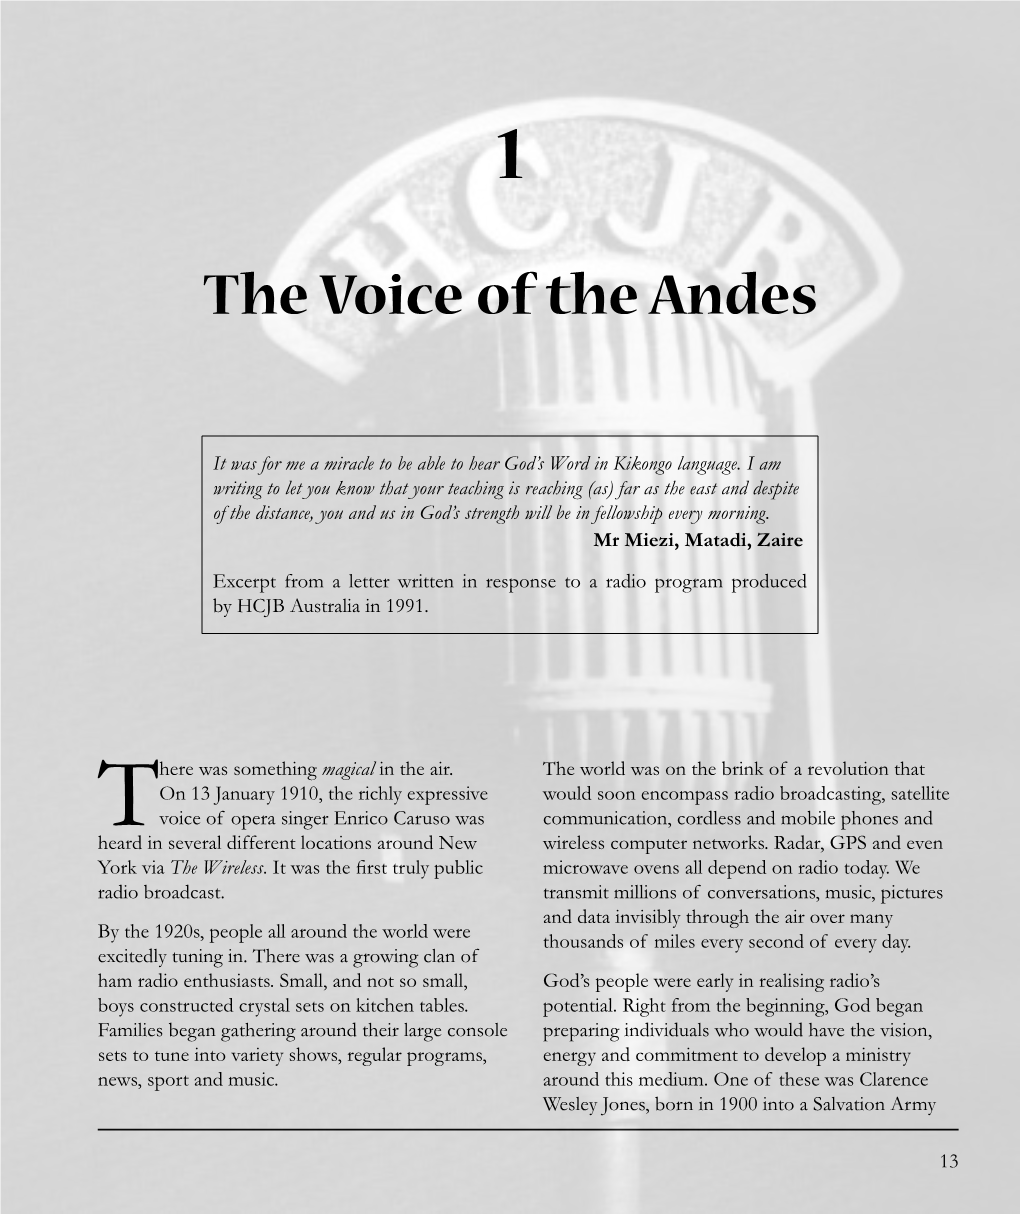 The Voice of the Andes